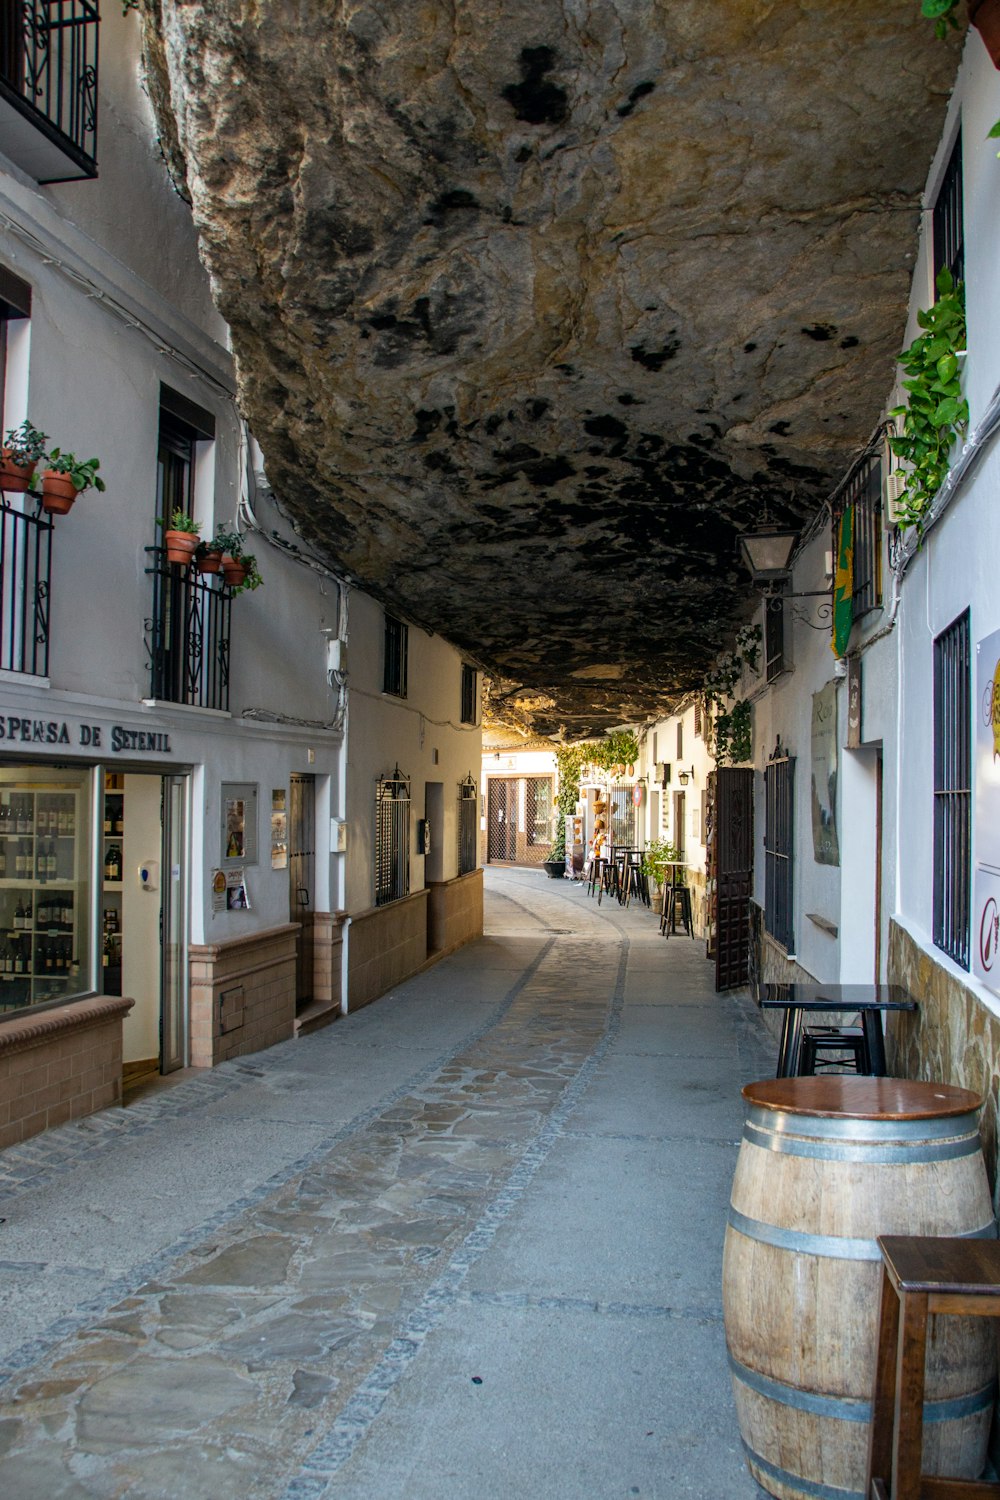 a narrow street with a large rock hanging from the ceiling